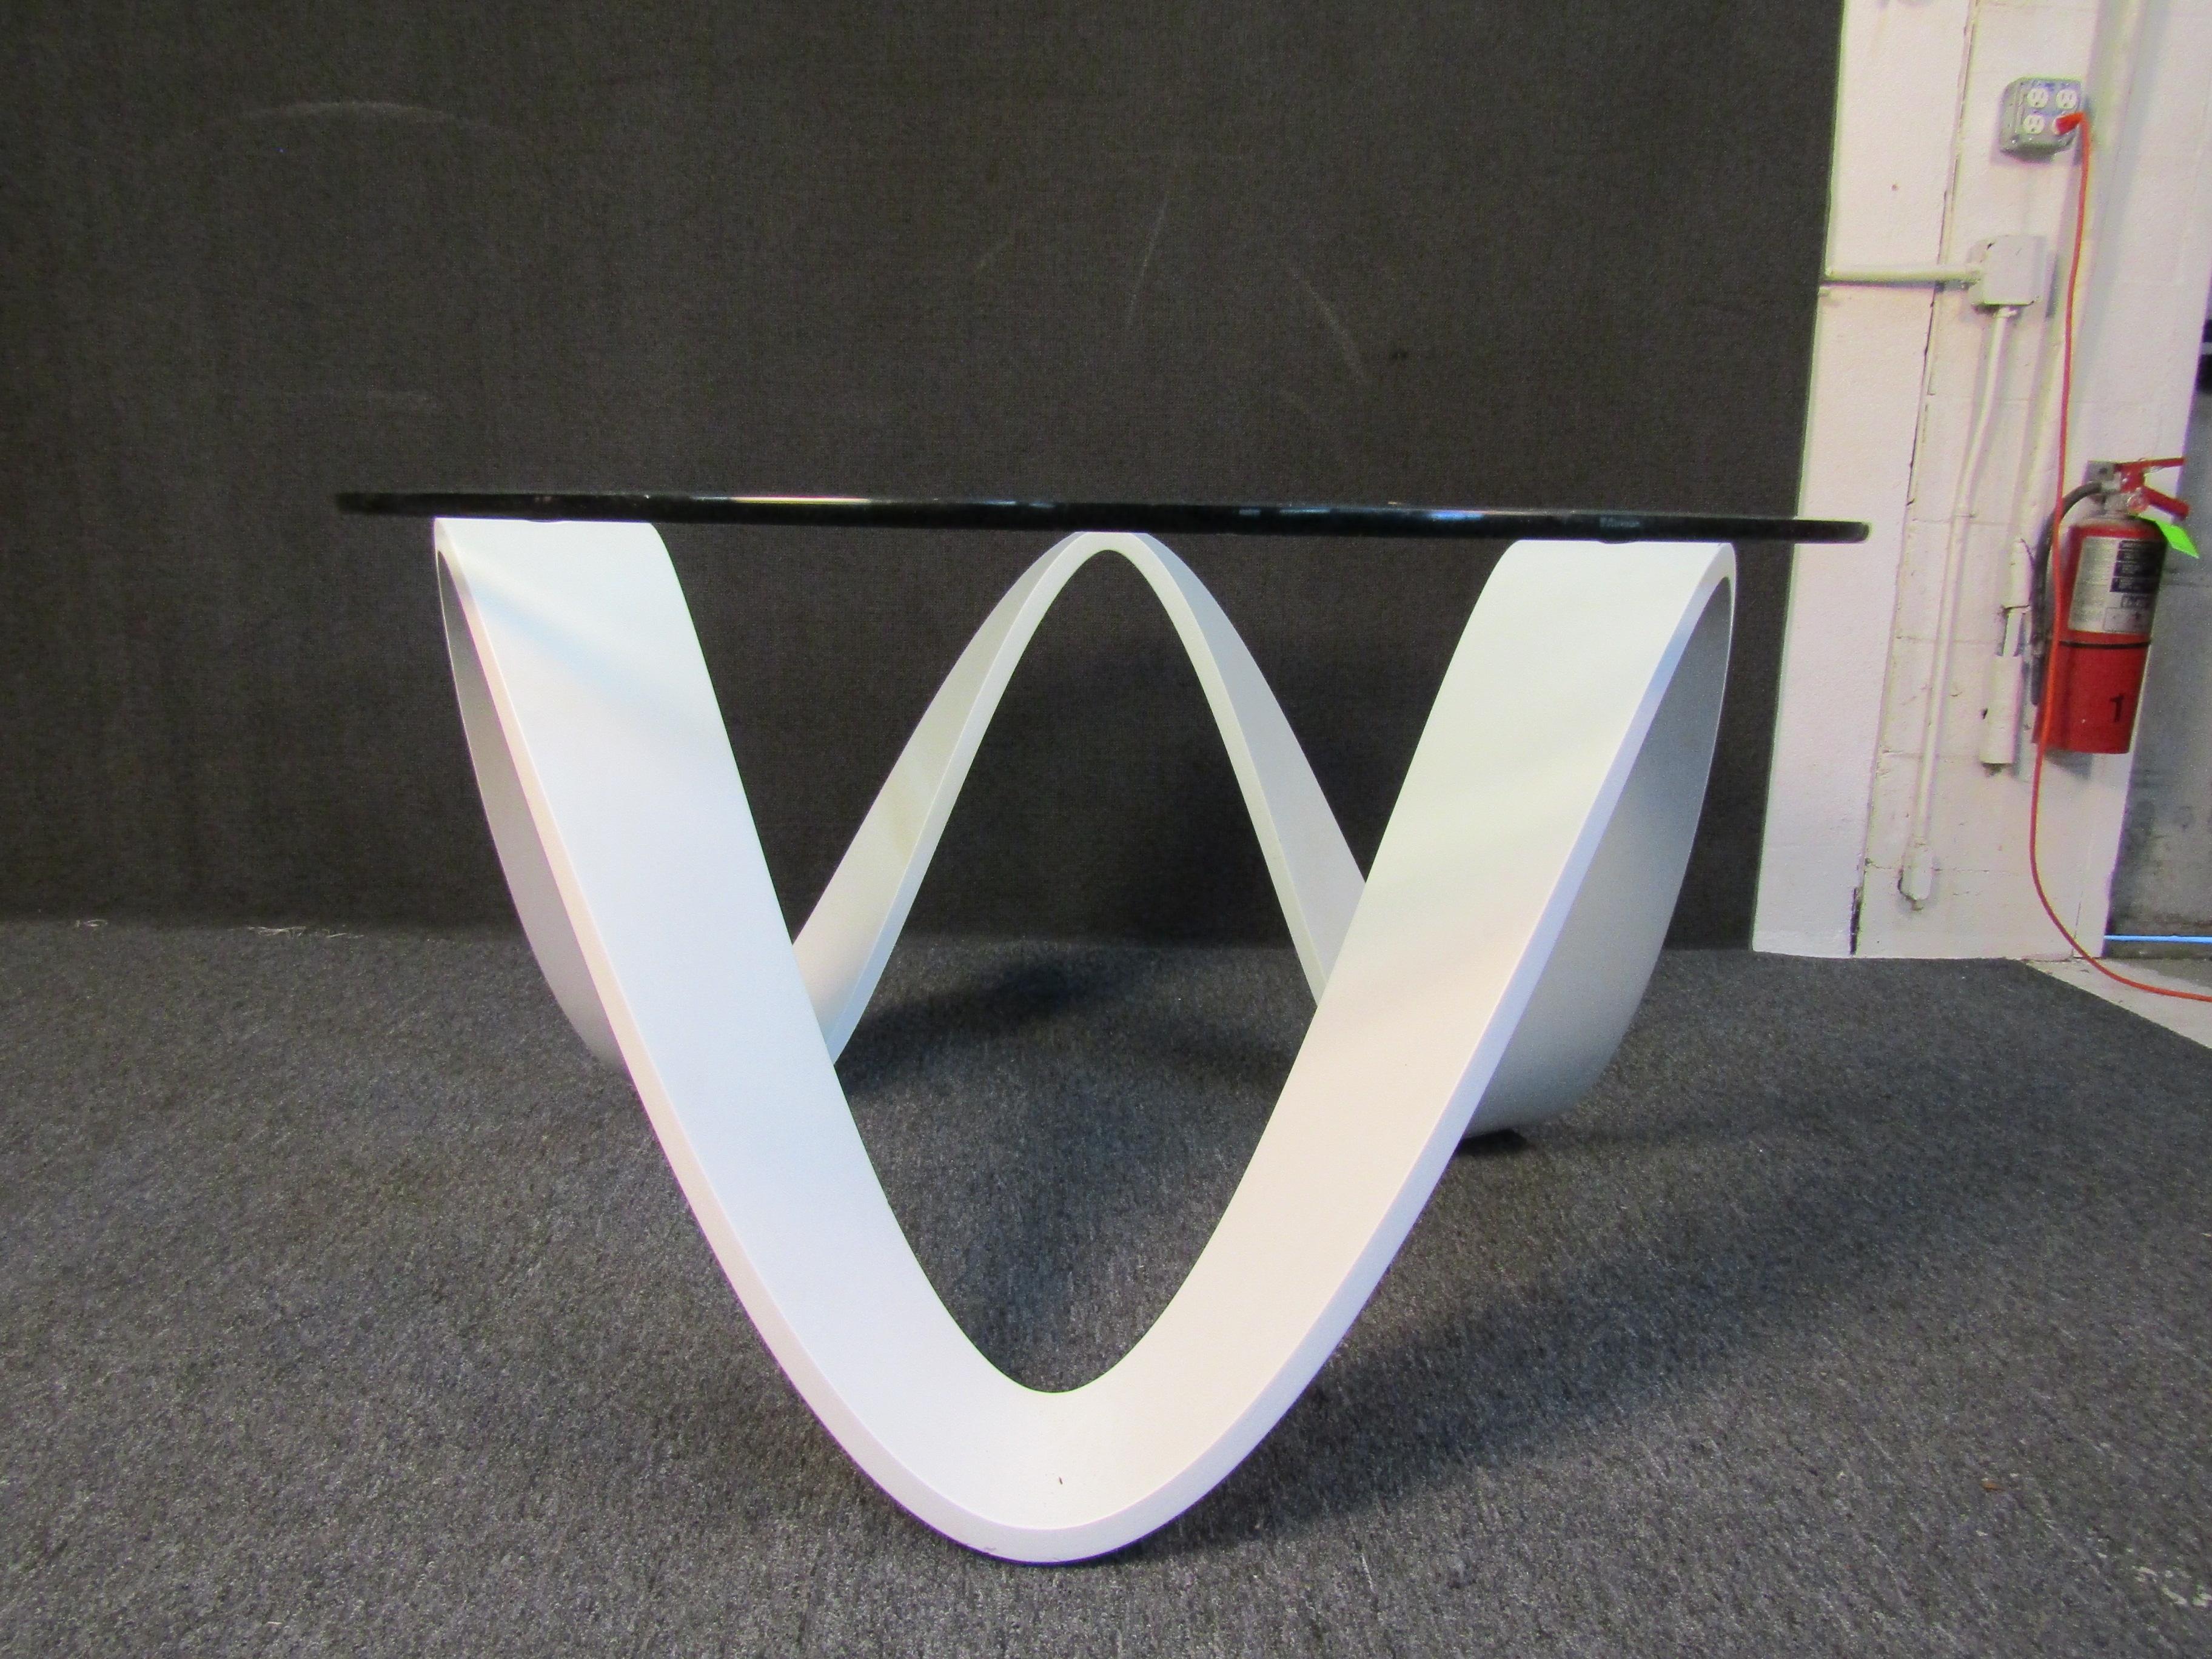 Unique glass table featuring a flowing white base on three contact points. The top is round and has an elegant beveled glass. Please confirm location NY or NJ.